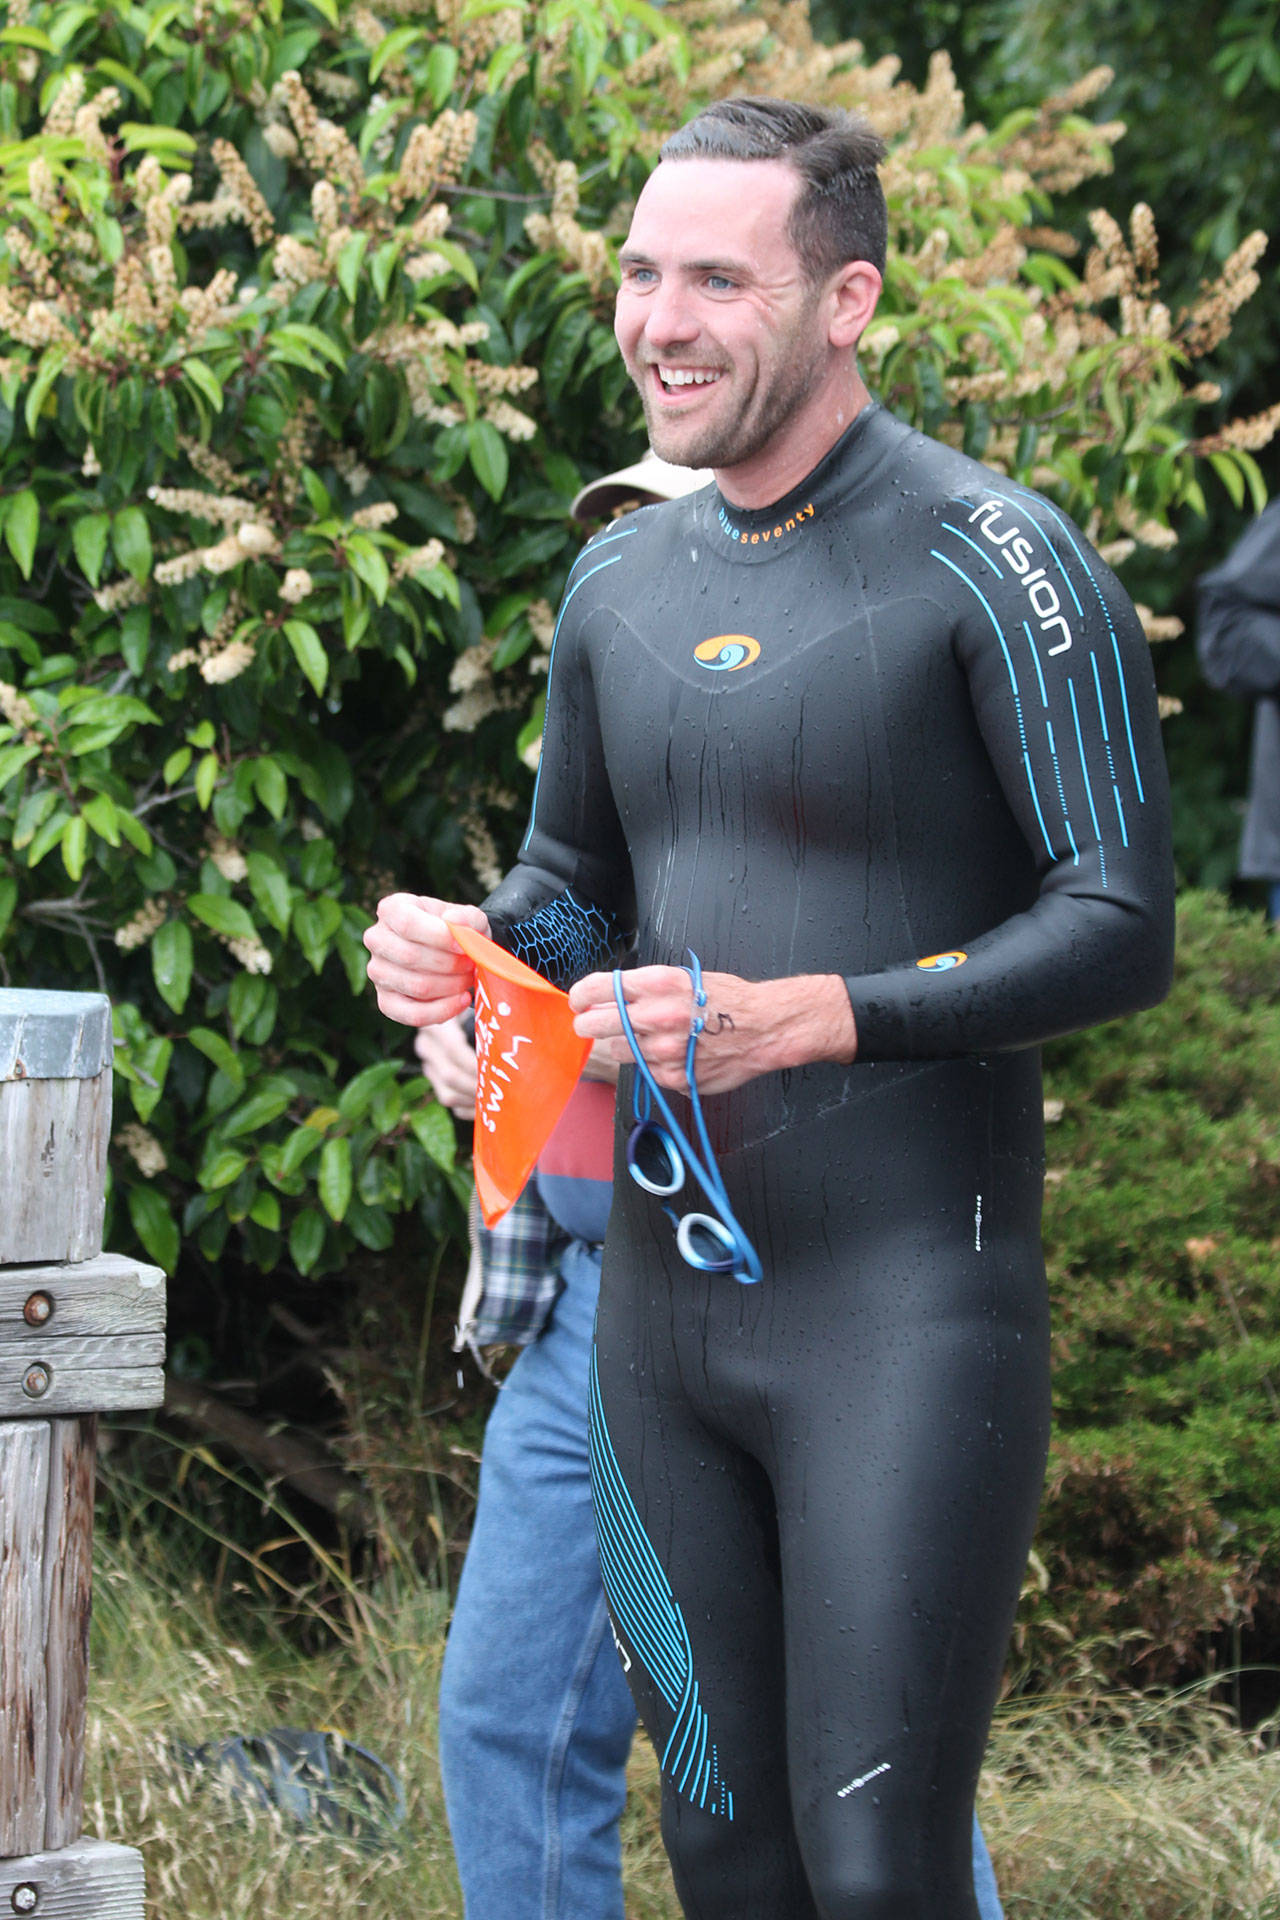 David Dahl is all smiles after winning the 1.2-mile race in record time.(Photo by Jim Waller/South Whidbey Record)